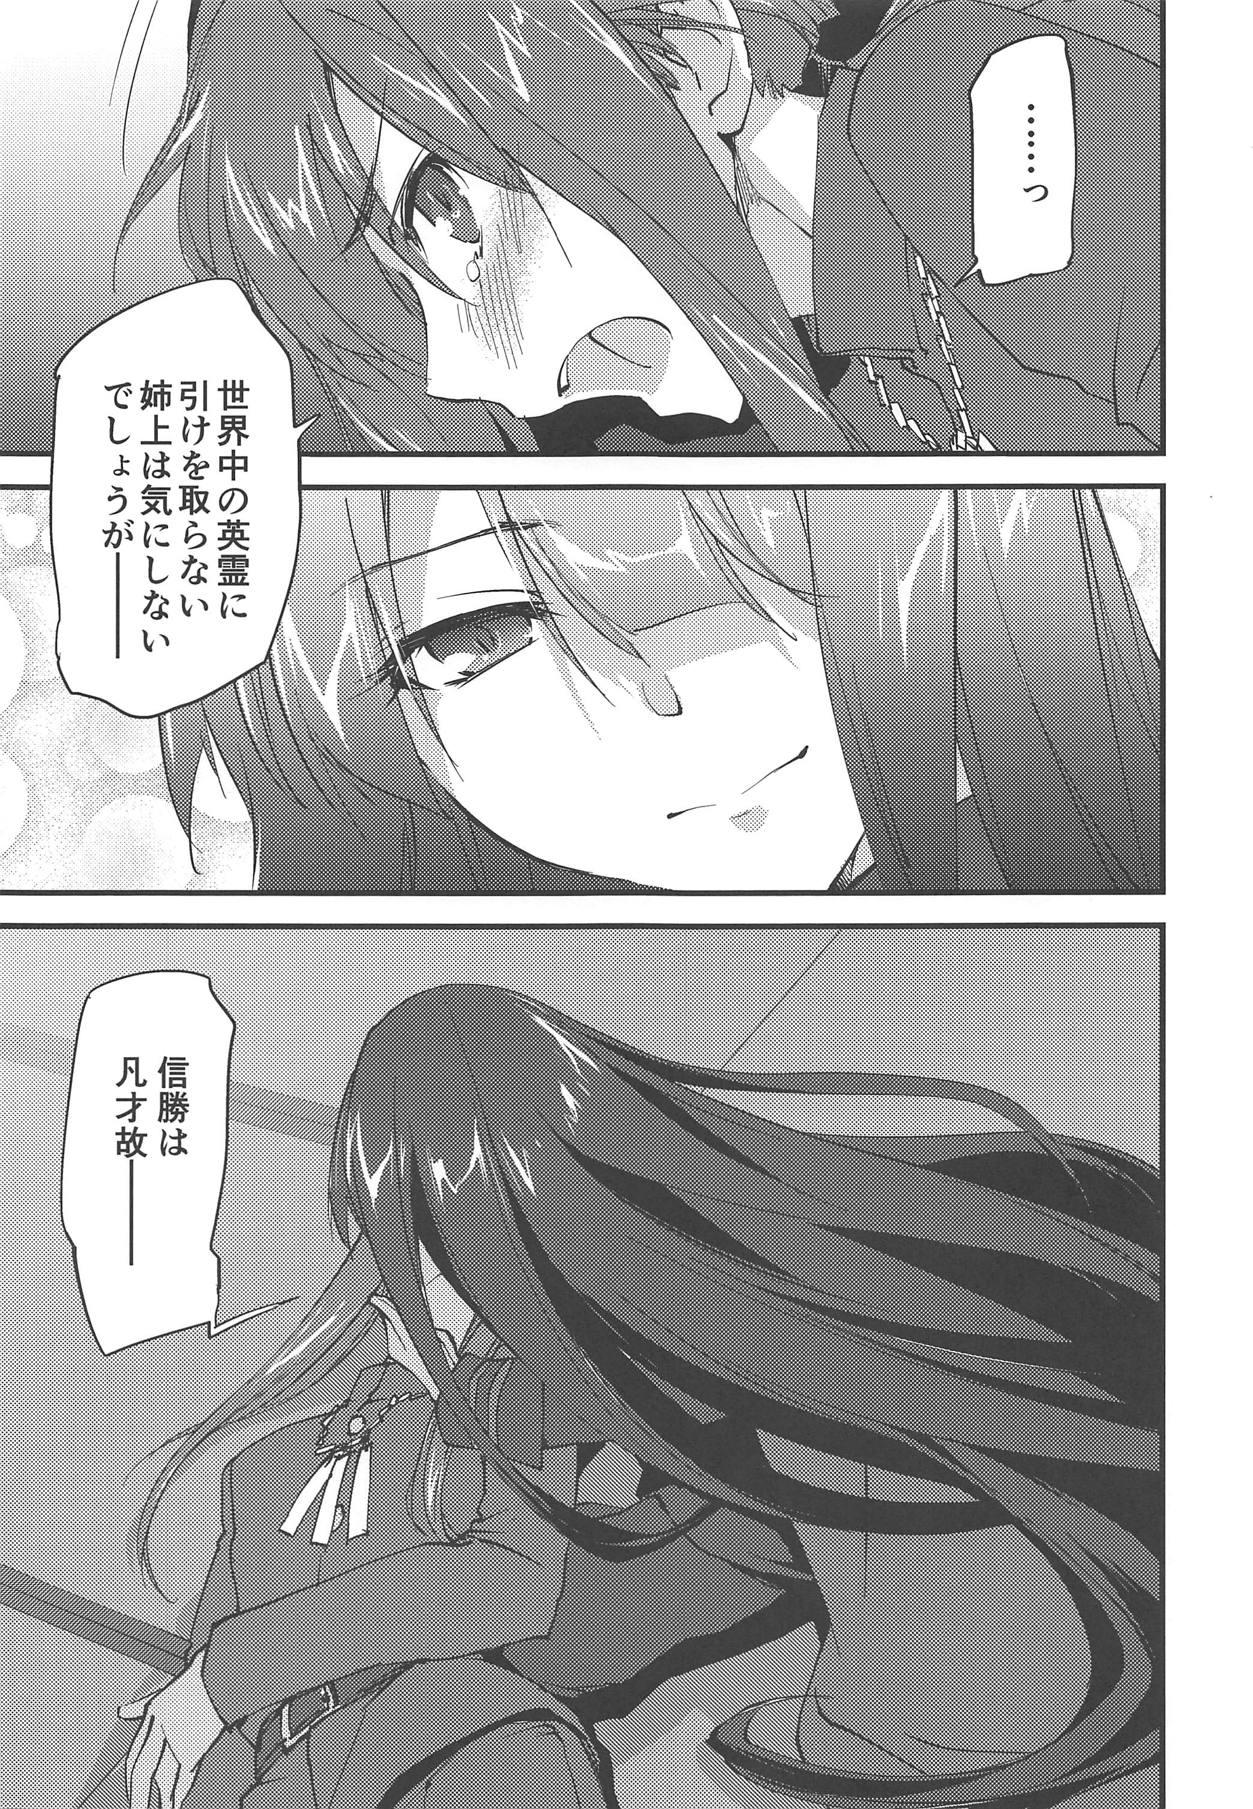 Woman Mugen no Gotoku - Fate grand order Lovers - Page 6